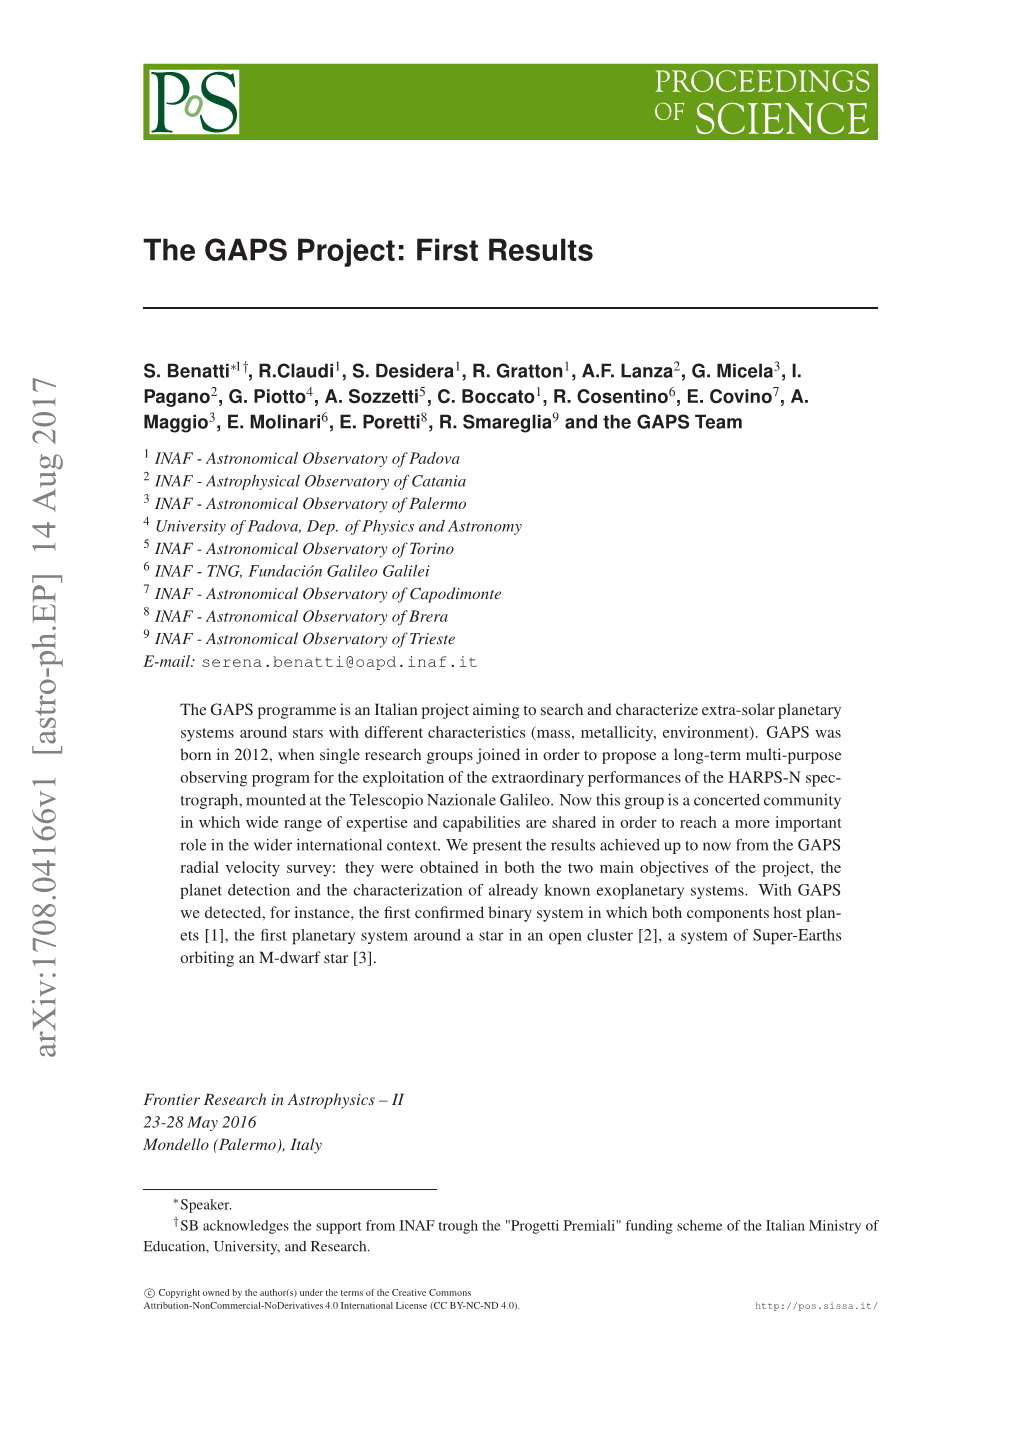 The GAPS Project: First Results